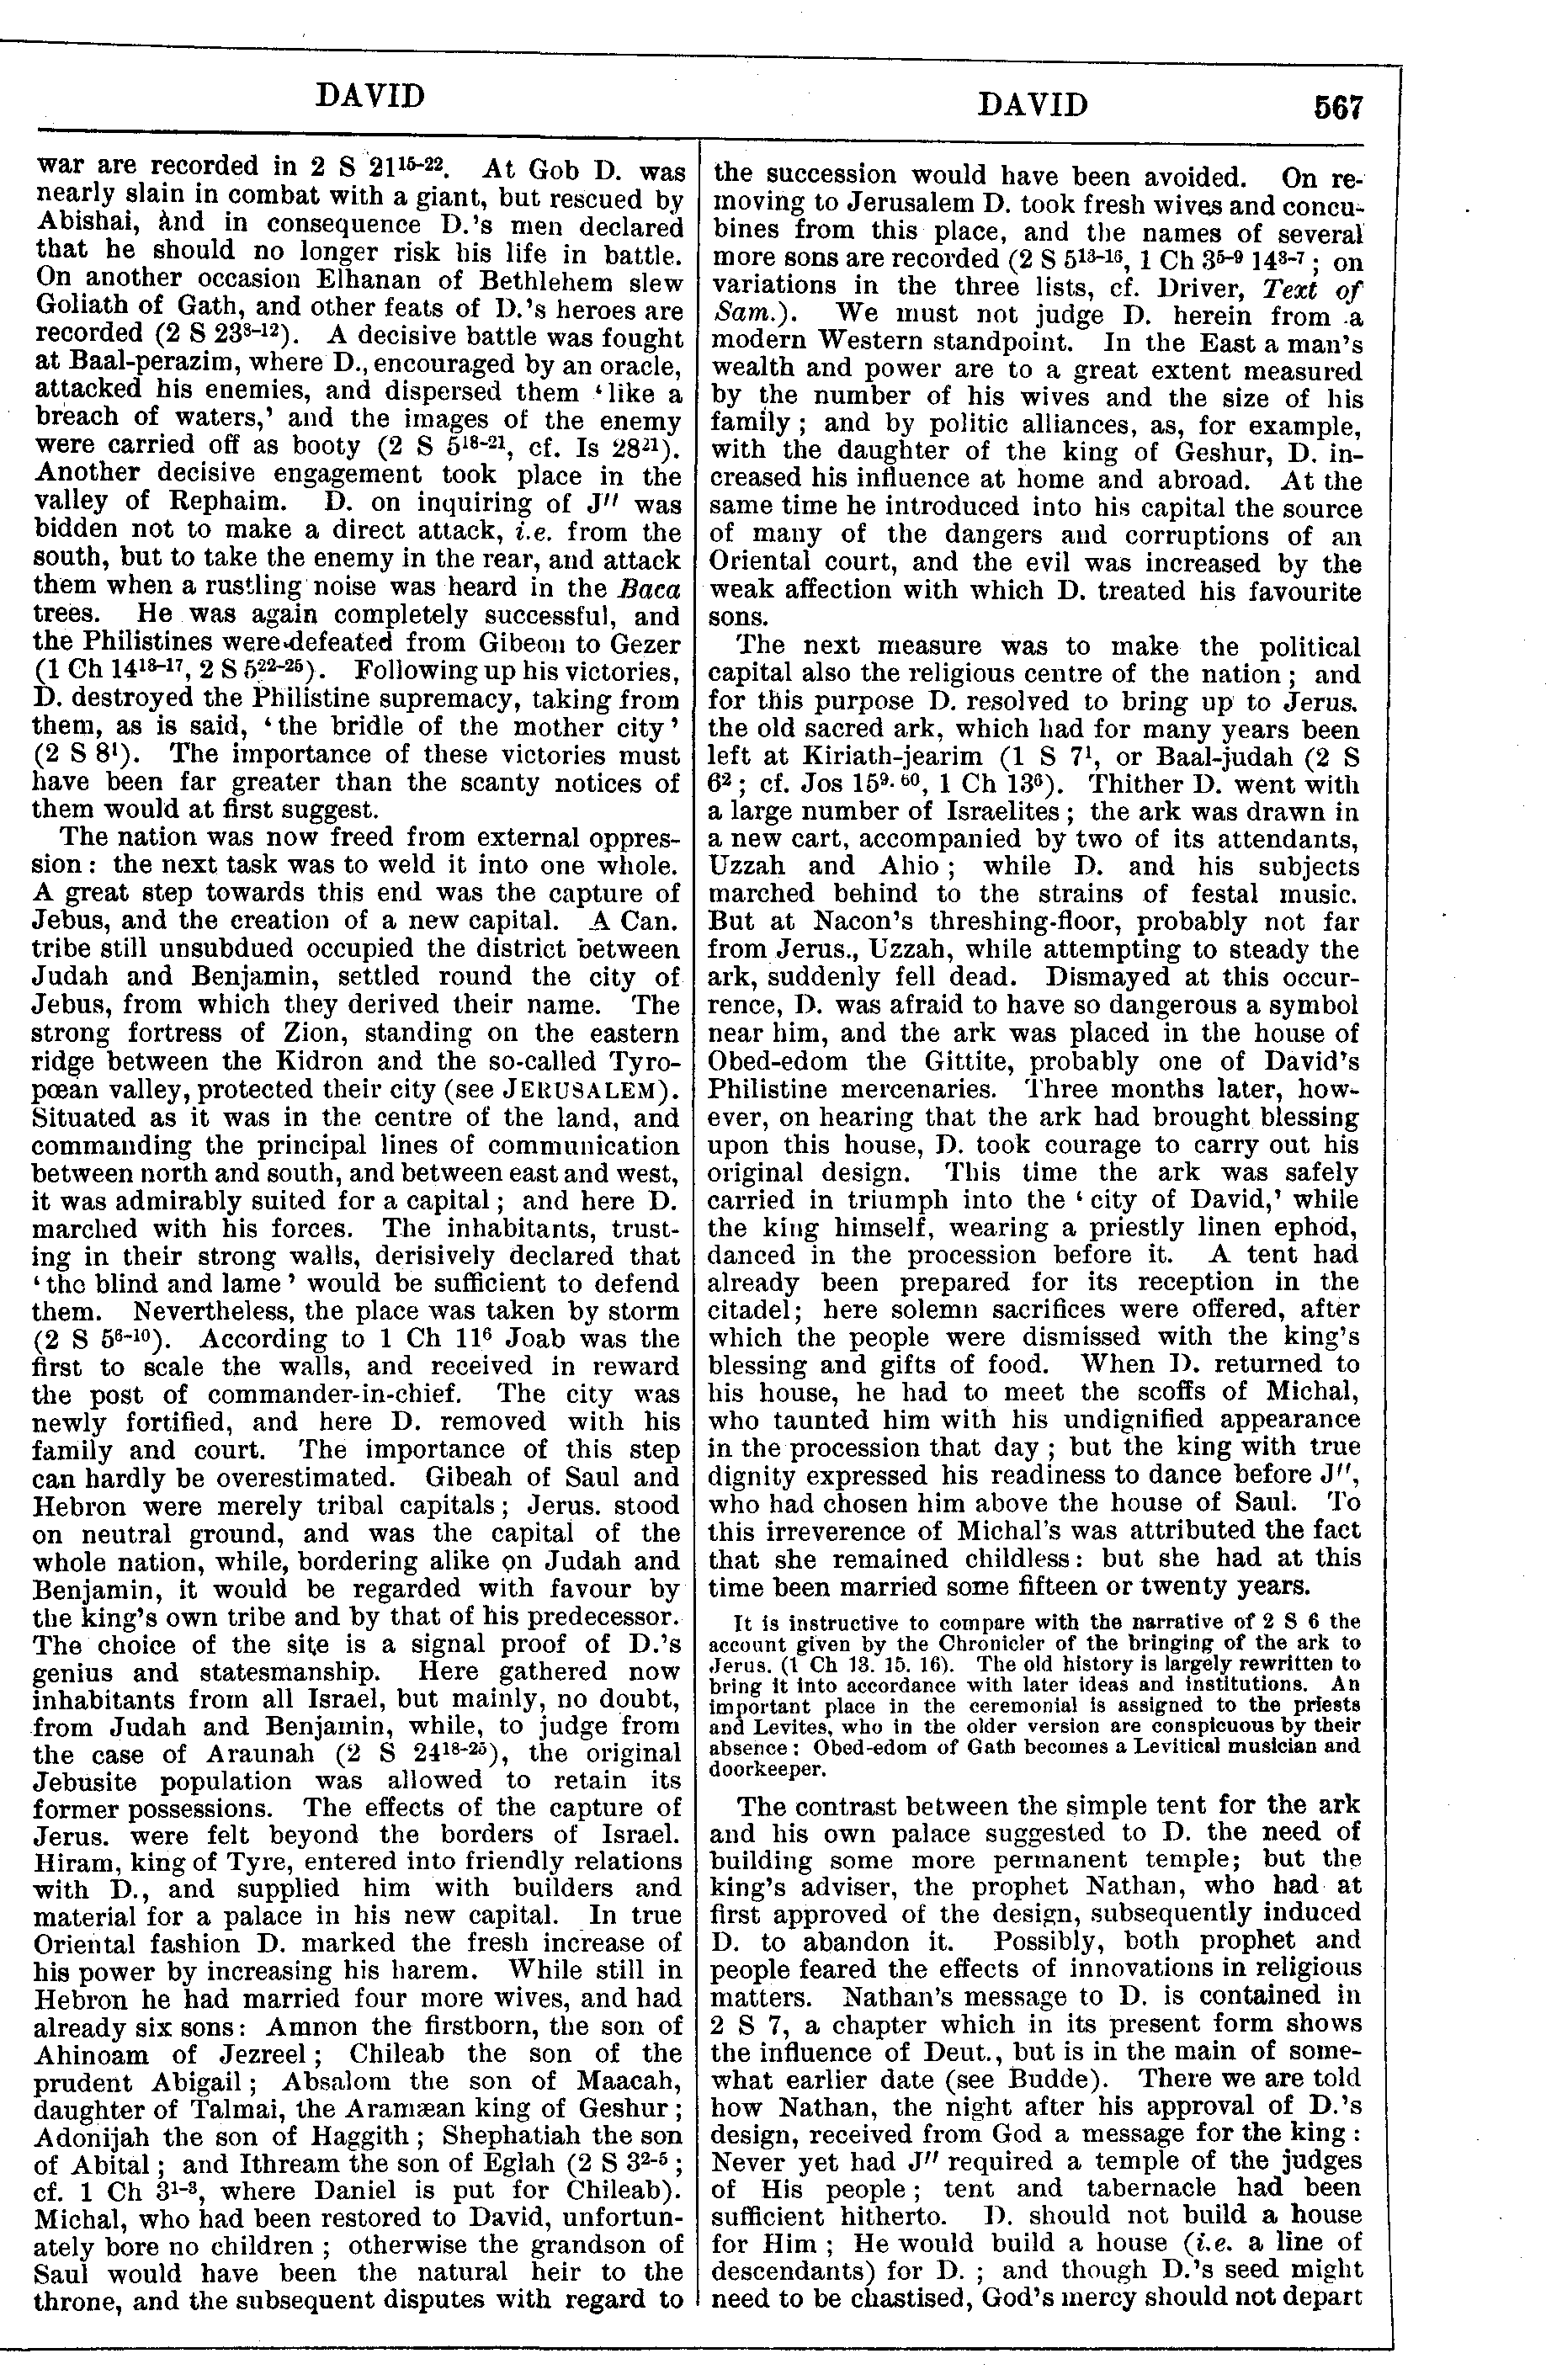 Image of page 567